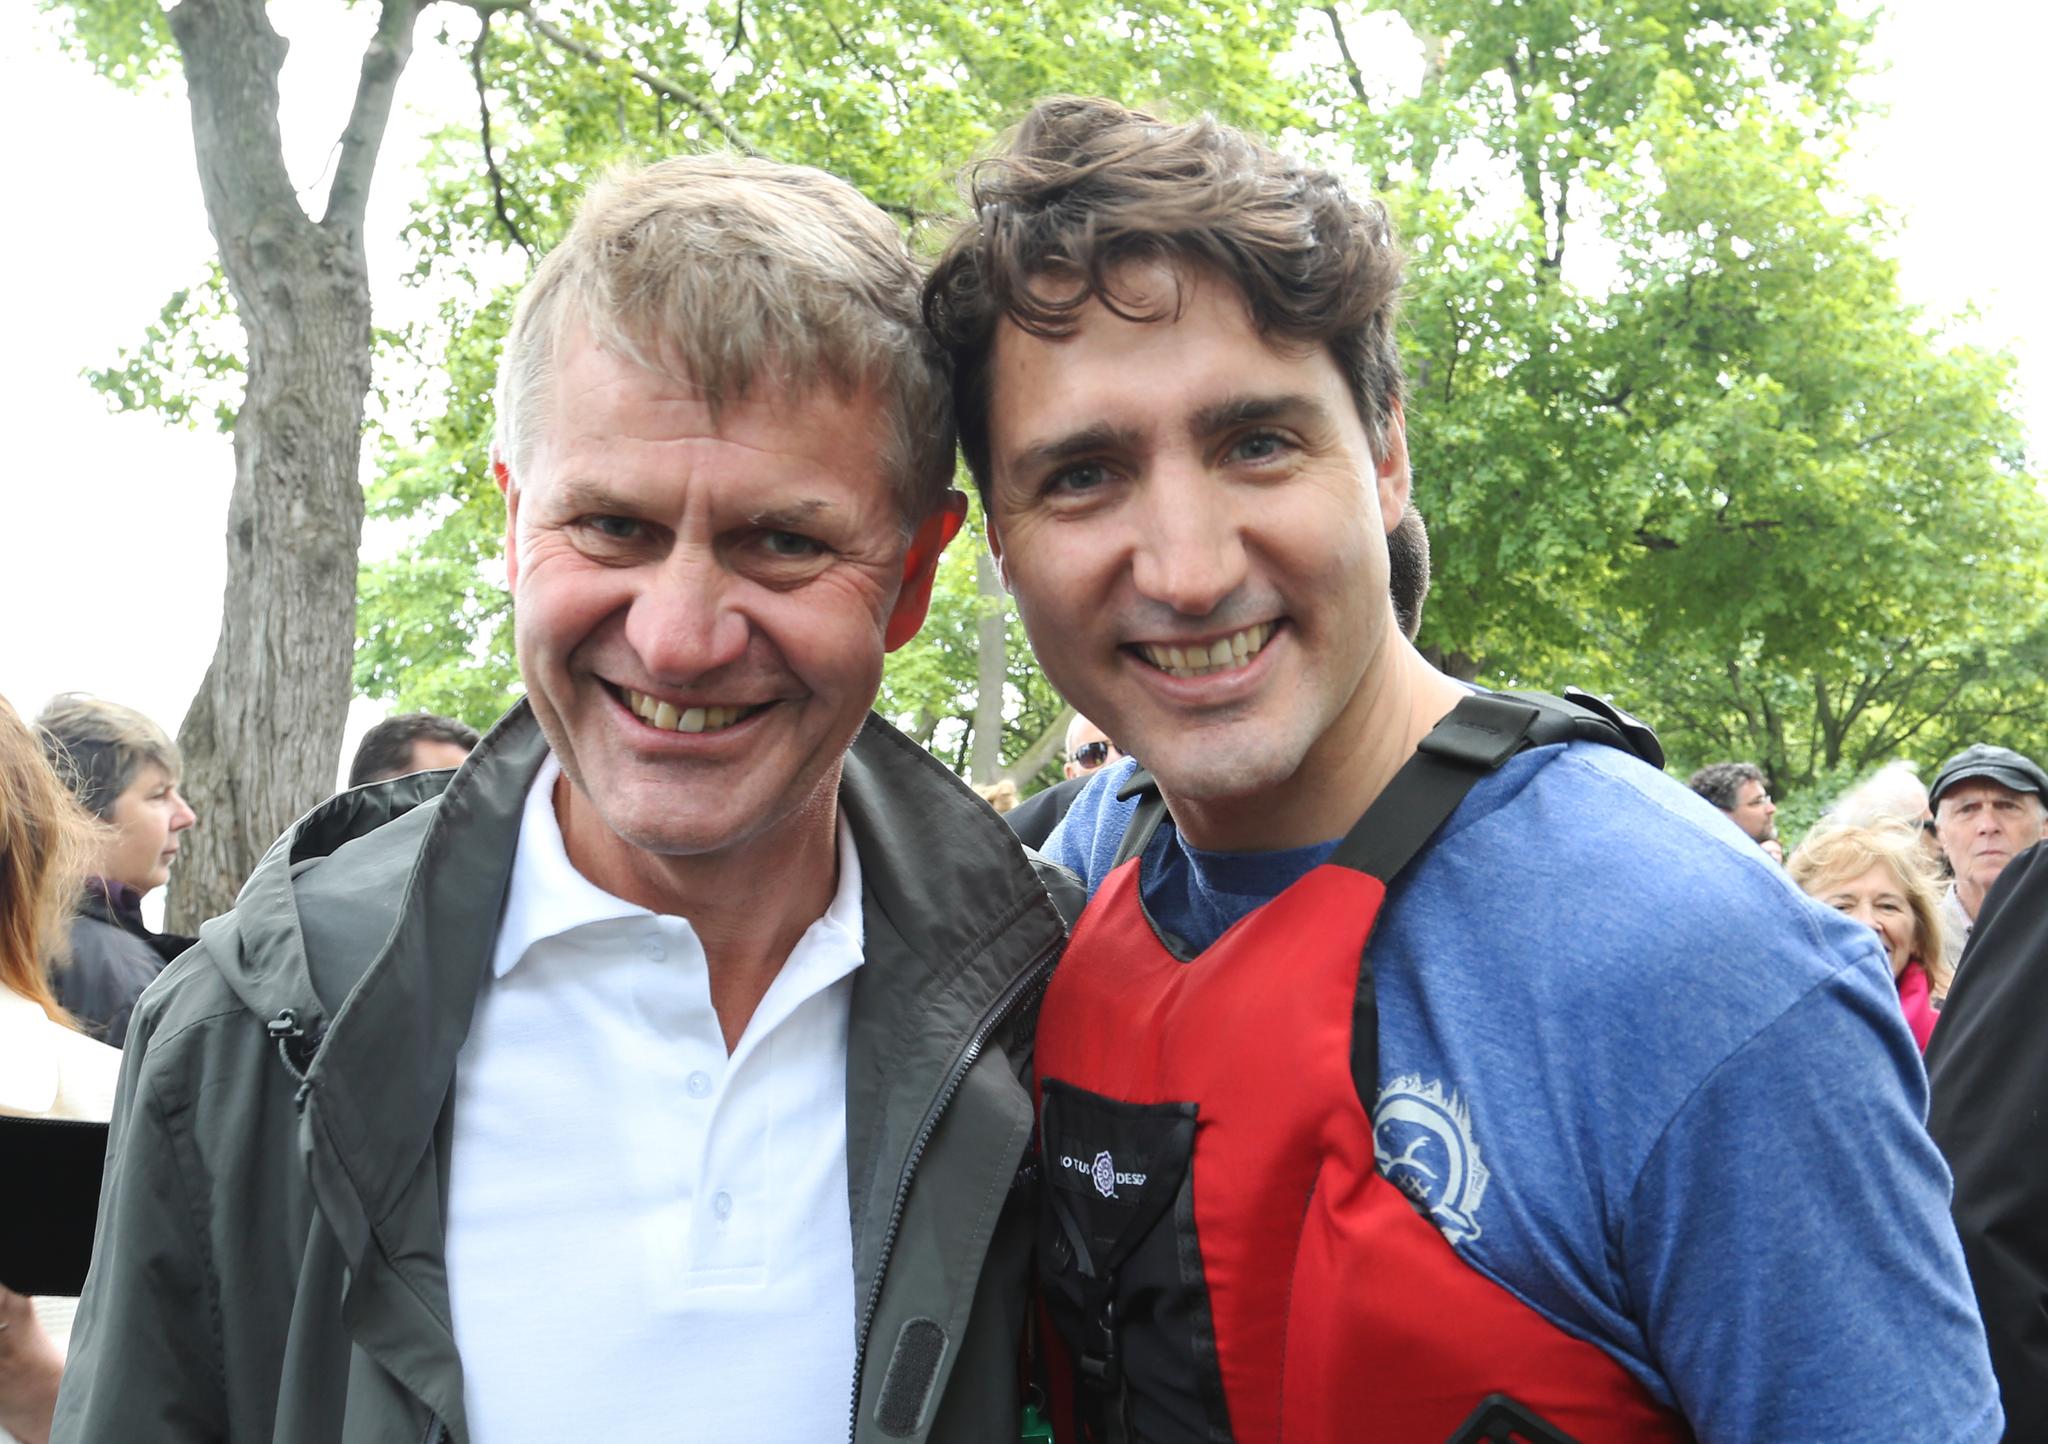 Solheim has developed a substantial network, and often meets world leaders through his job. Here he is with Justin Trudeau, Prime Minister of Canada, in June this year. 